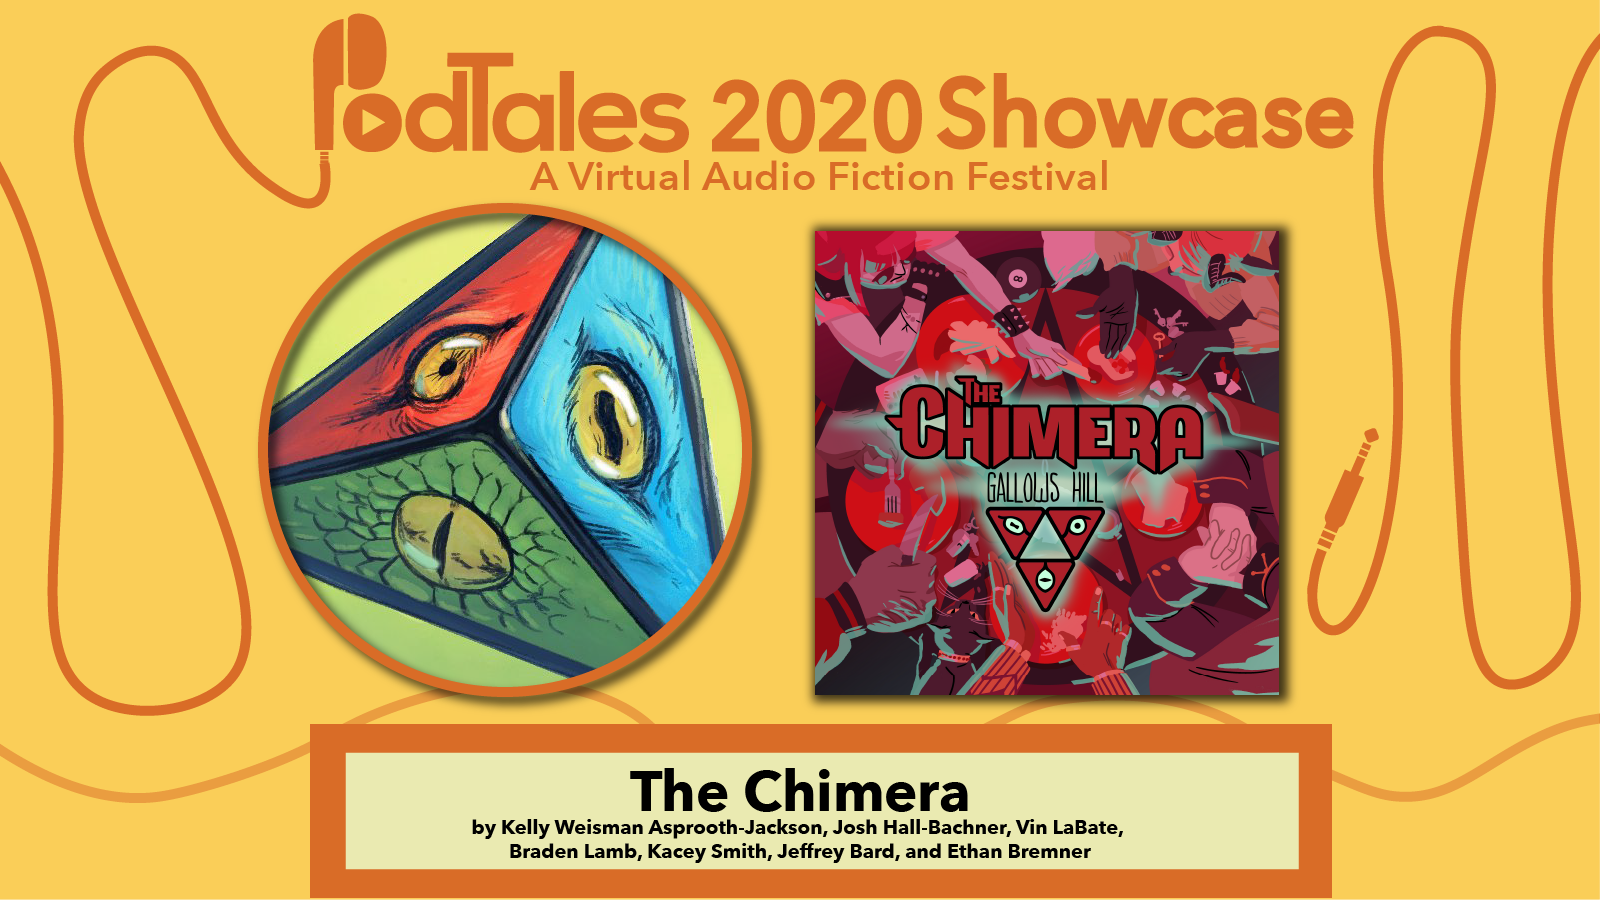 Text reading “PodTales 2020 Showcase: A Virtual Audio Fiction Festival”, The Chimera Logo, Show Art for The Chimera: Gallows Hill, Text reading “The Chimera by Kelly Weisman Asprooth-Jackson, Josh Hall-Bachner, Vin LaBate, Braden Lamb, Kacey Smith, Jeffrey Bard, and Ethan Bremner”